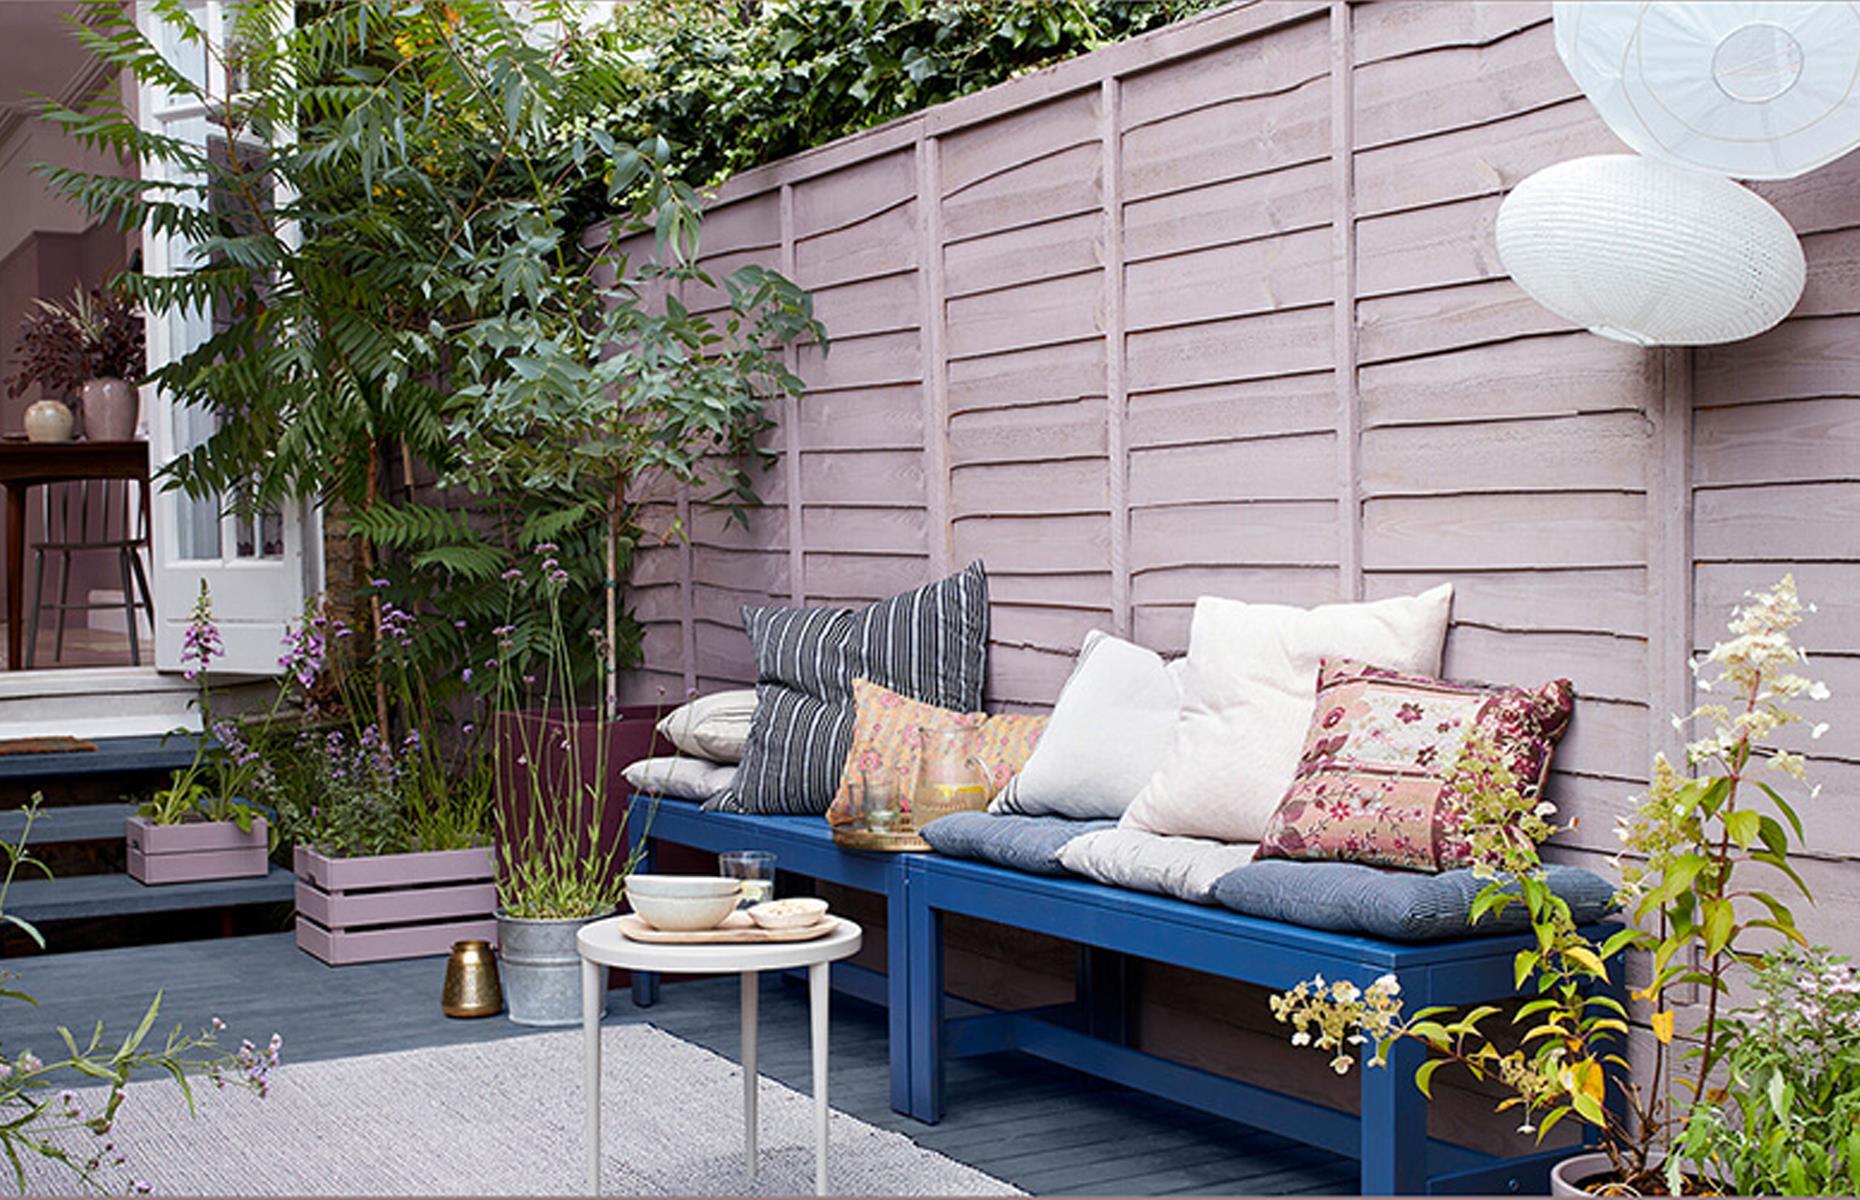 <p>A low-maintenance garden can be beautiful, whether that's <a href="https://www.loveproperty.com/gallerylist/71425/stylish-but-simple-small-garden-ideas">a small patch</a> or somewhere designed for easy upkeep. Pay attention to boundaries and erect smart fencing—horizontal slats create a modern touch. Choose permanent planters rather than individual pots that get too messy. Plant up a mix of bulbs and evergreens so there’s always something of interest, without the need to replant and bring in hardwood furniture that requires little maintenance and still looks good with age.</p>